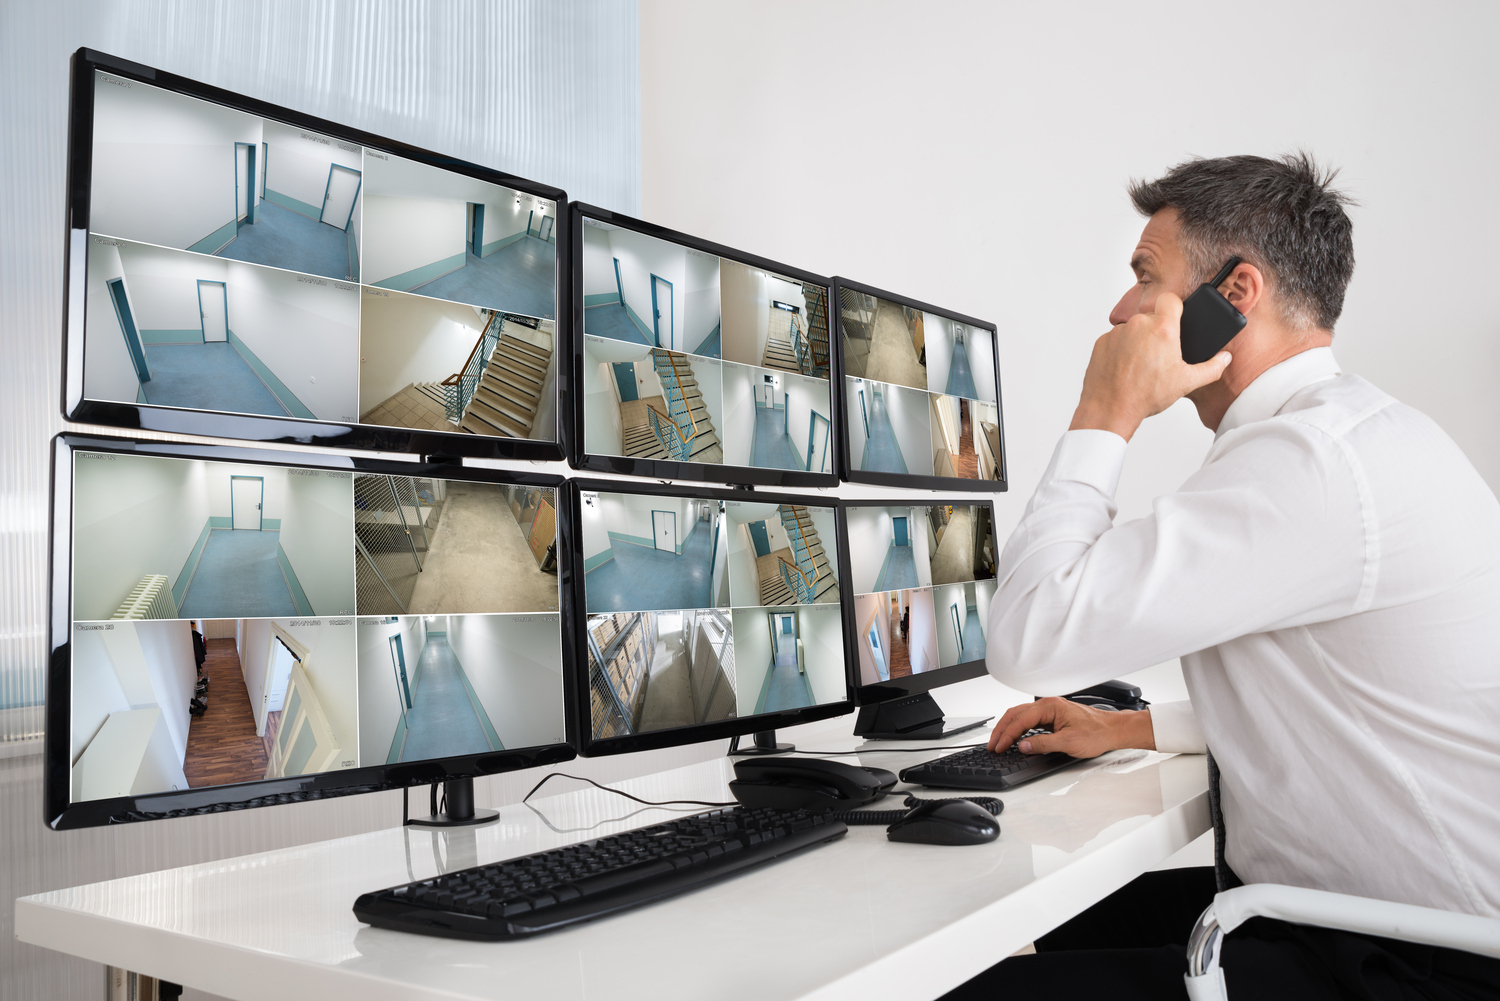 What Is The Role Of A Cctv Operator?